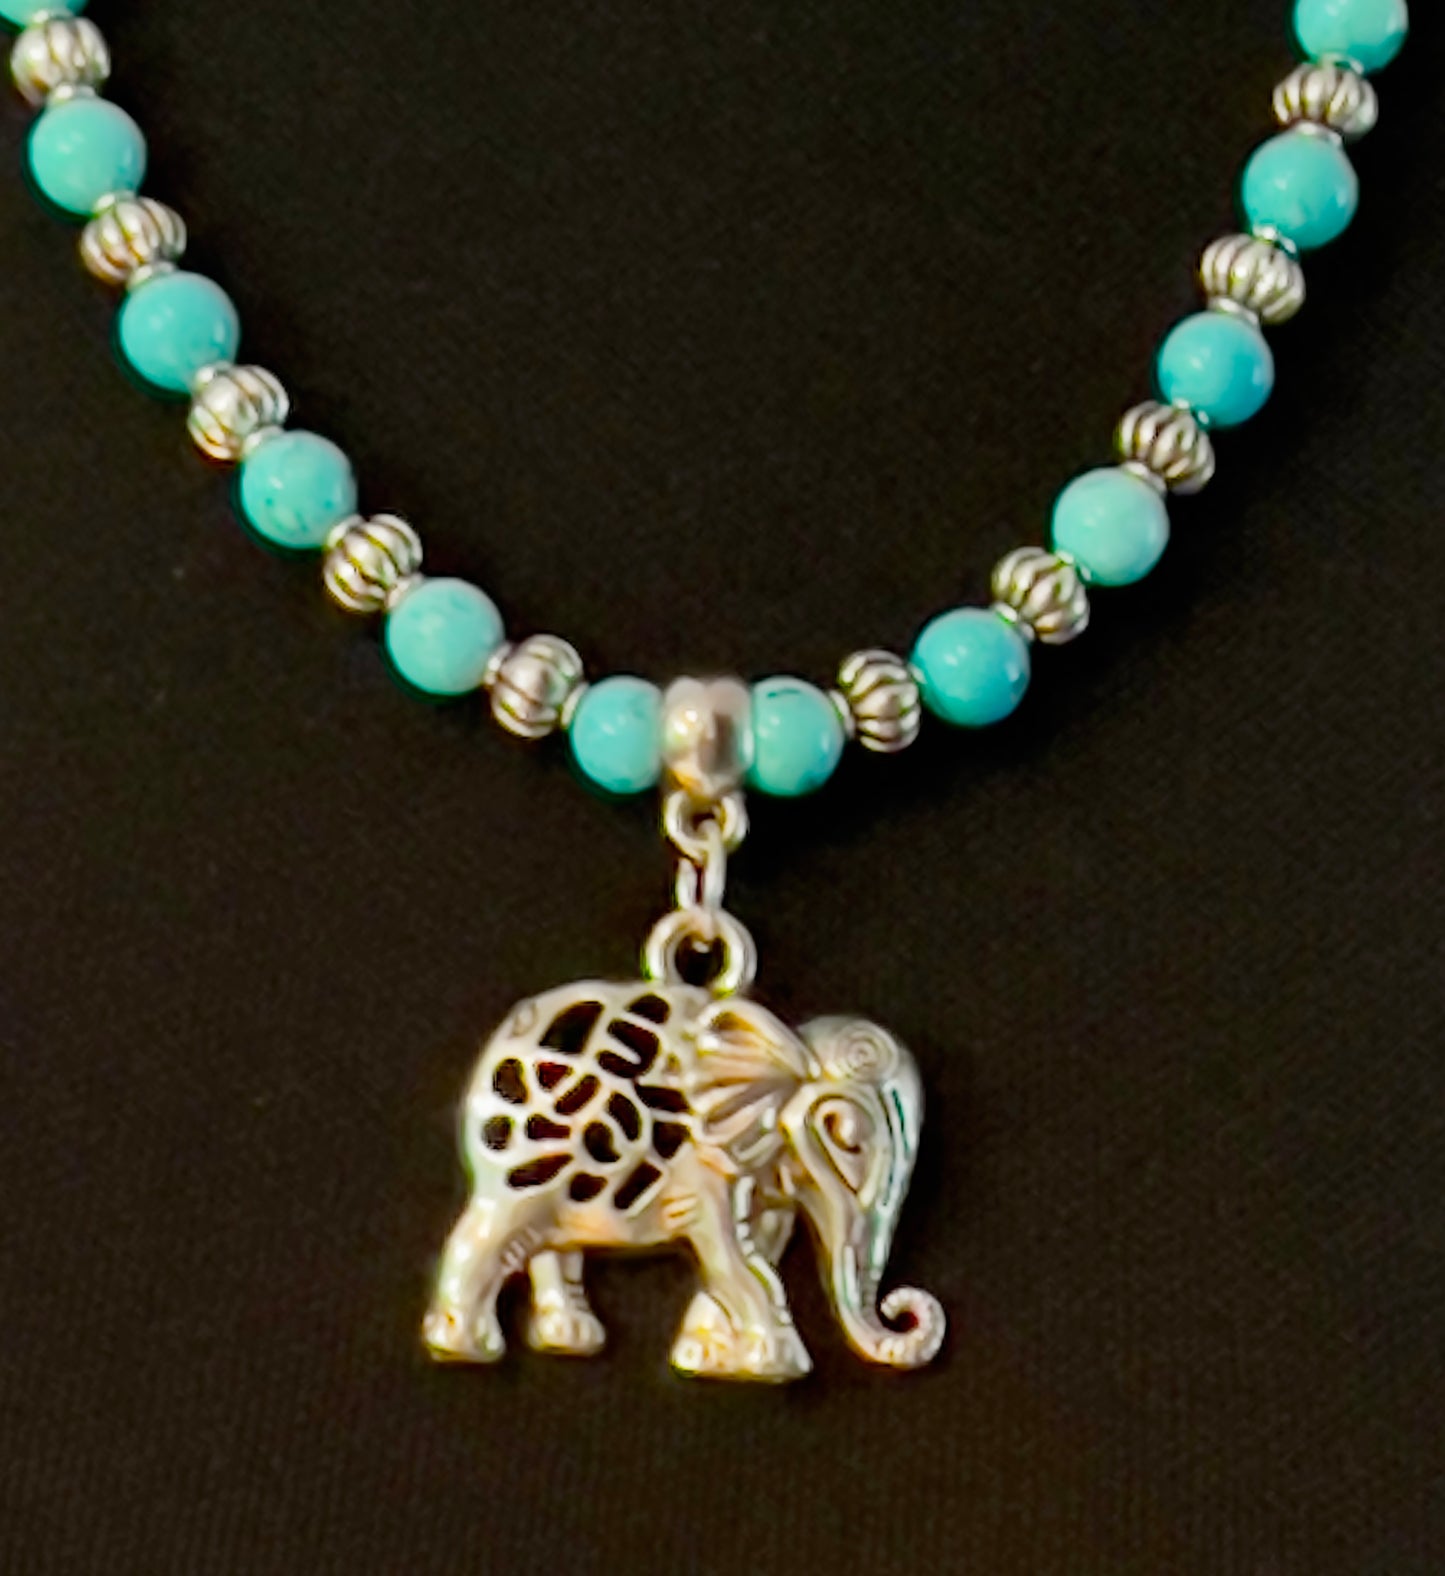 Turquoise and Sodalite Necklace with Indian Elephant